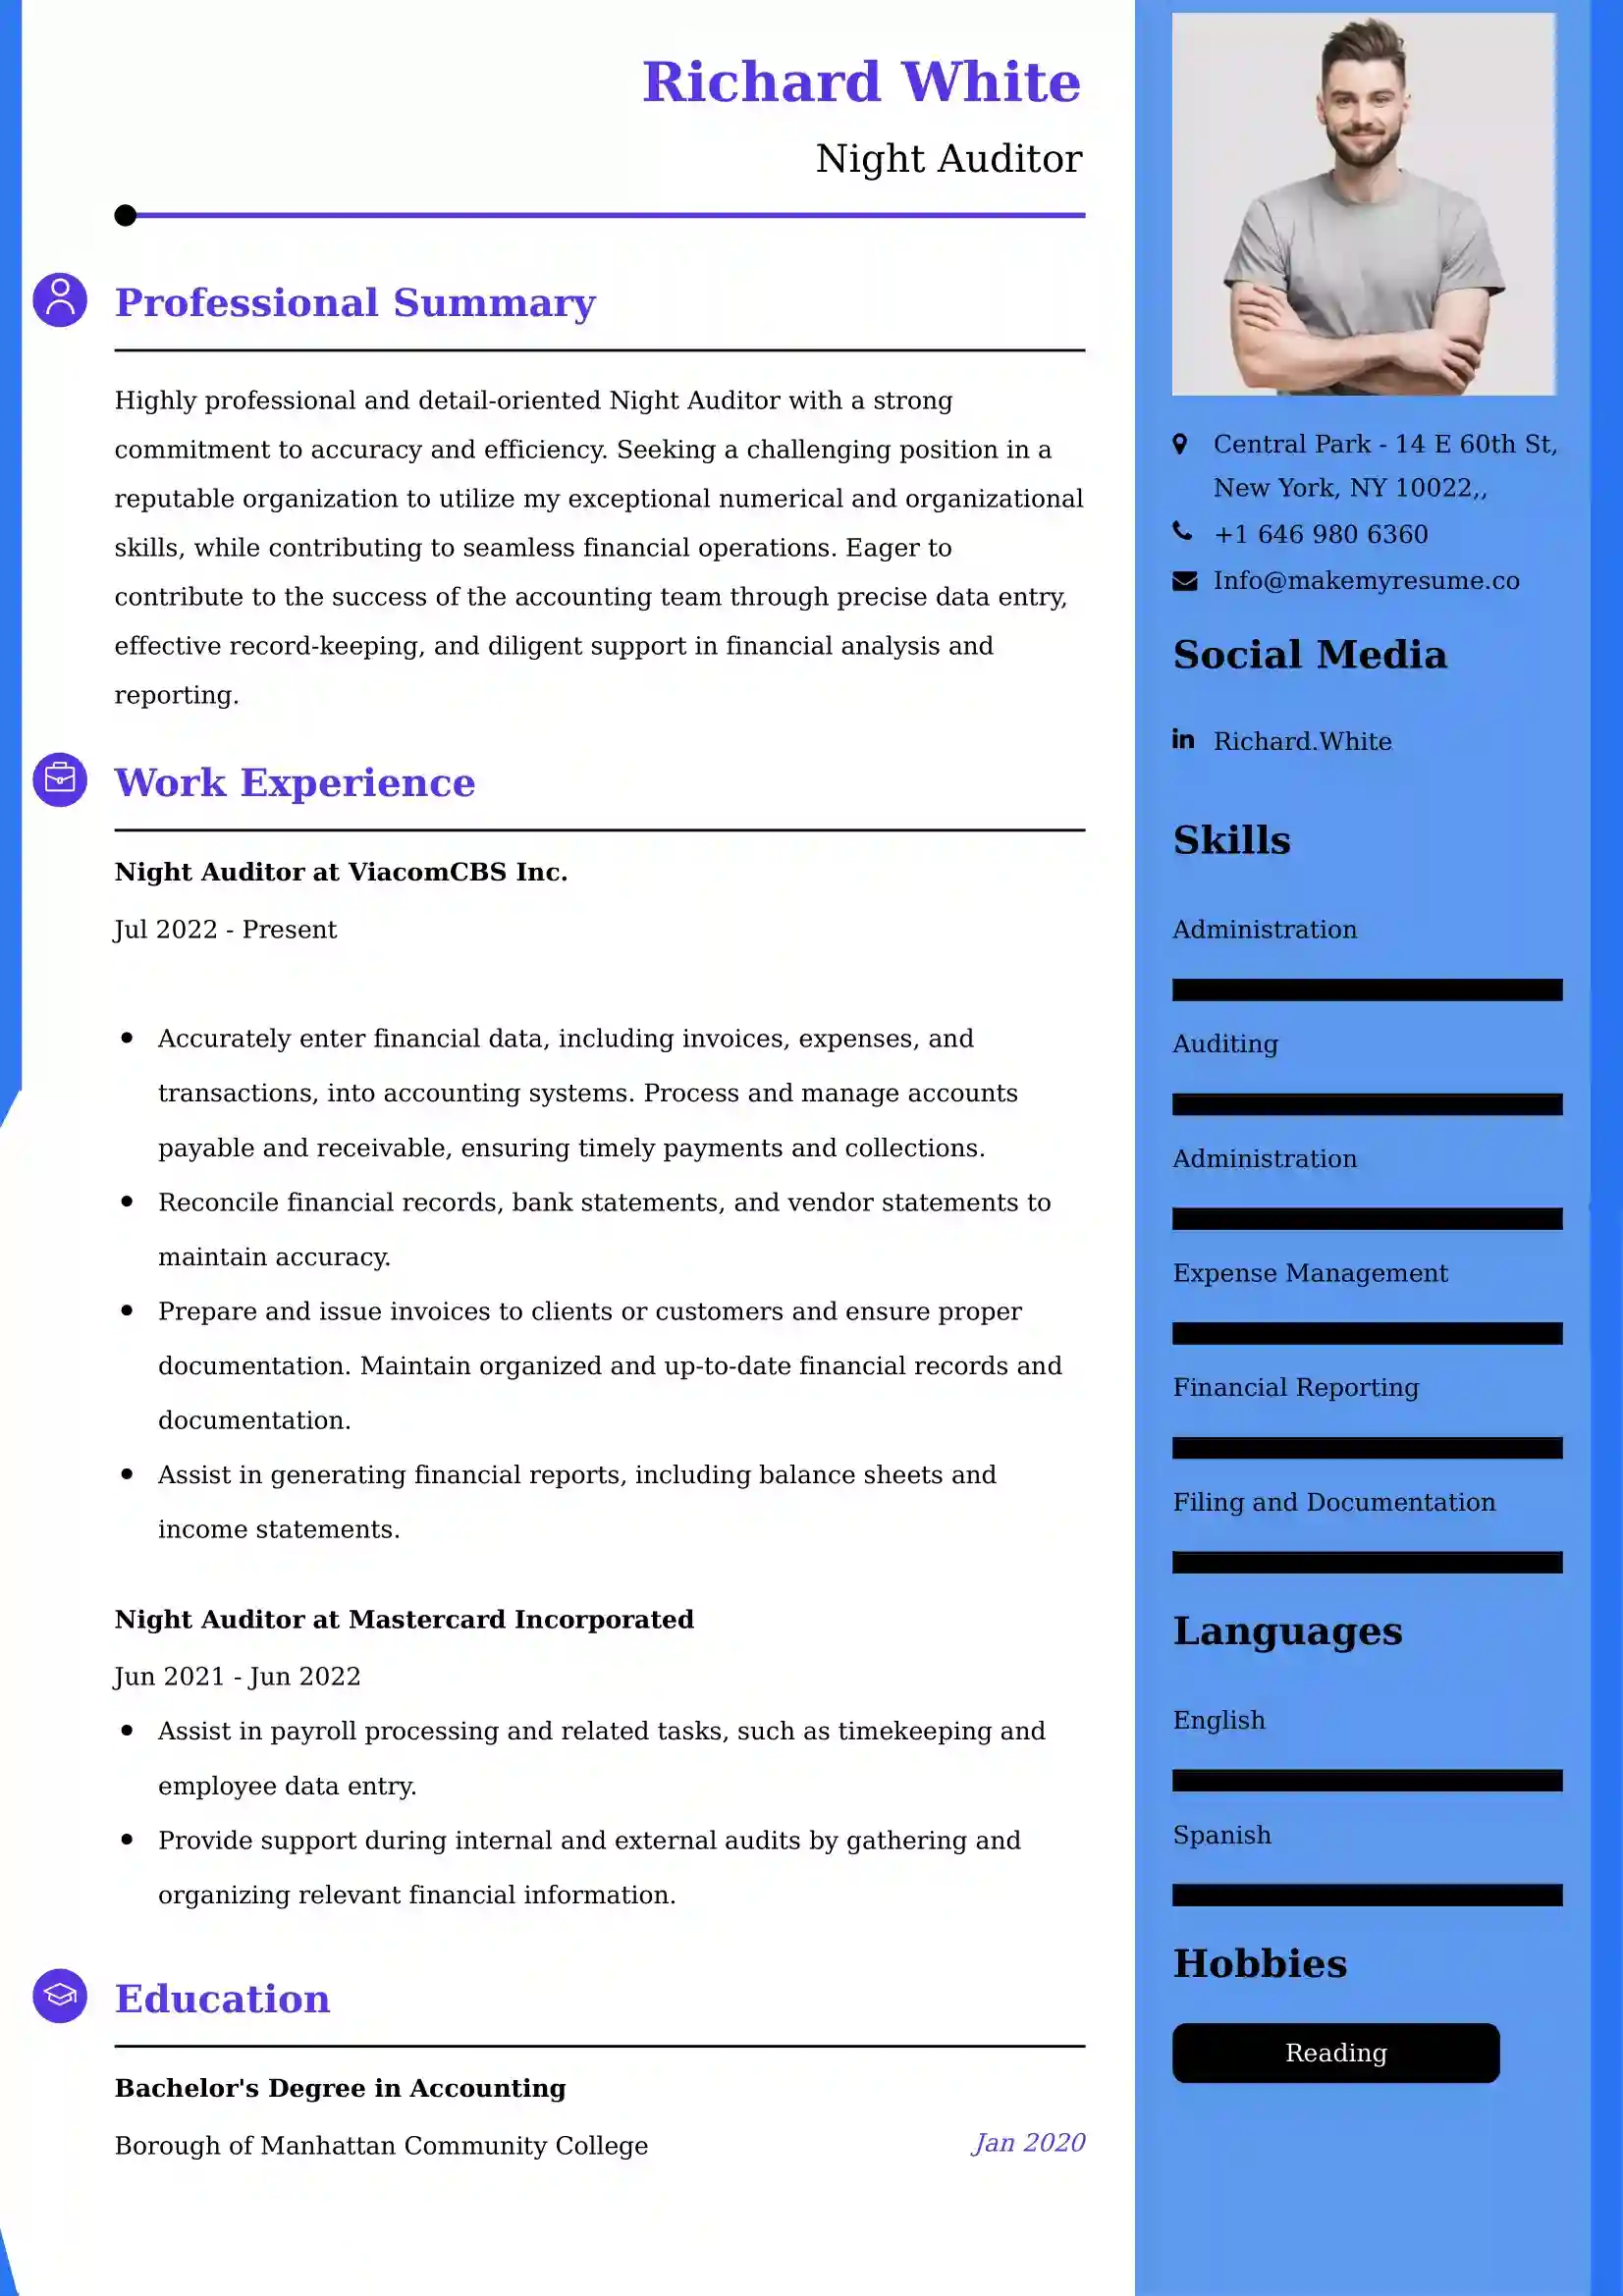 Night Auditor Resume Examples for UAE